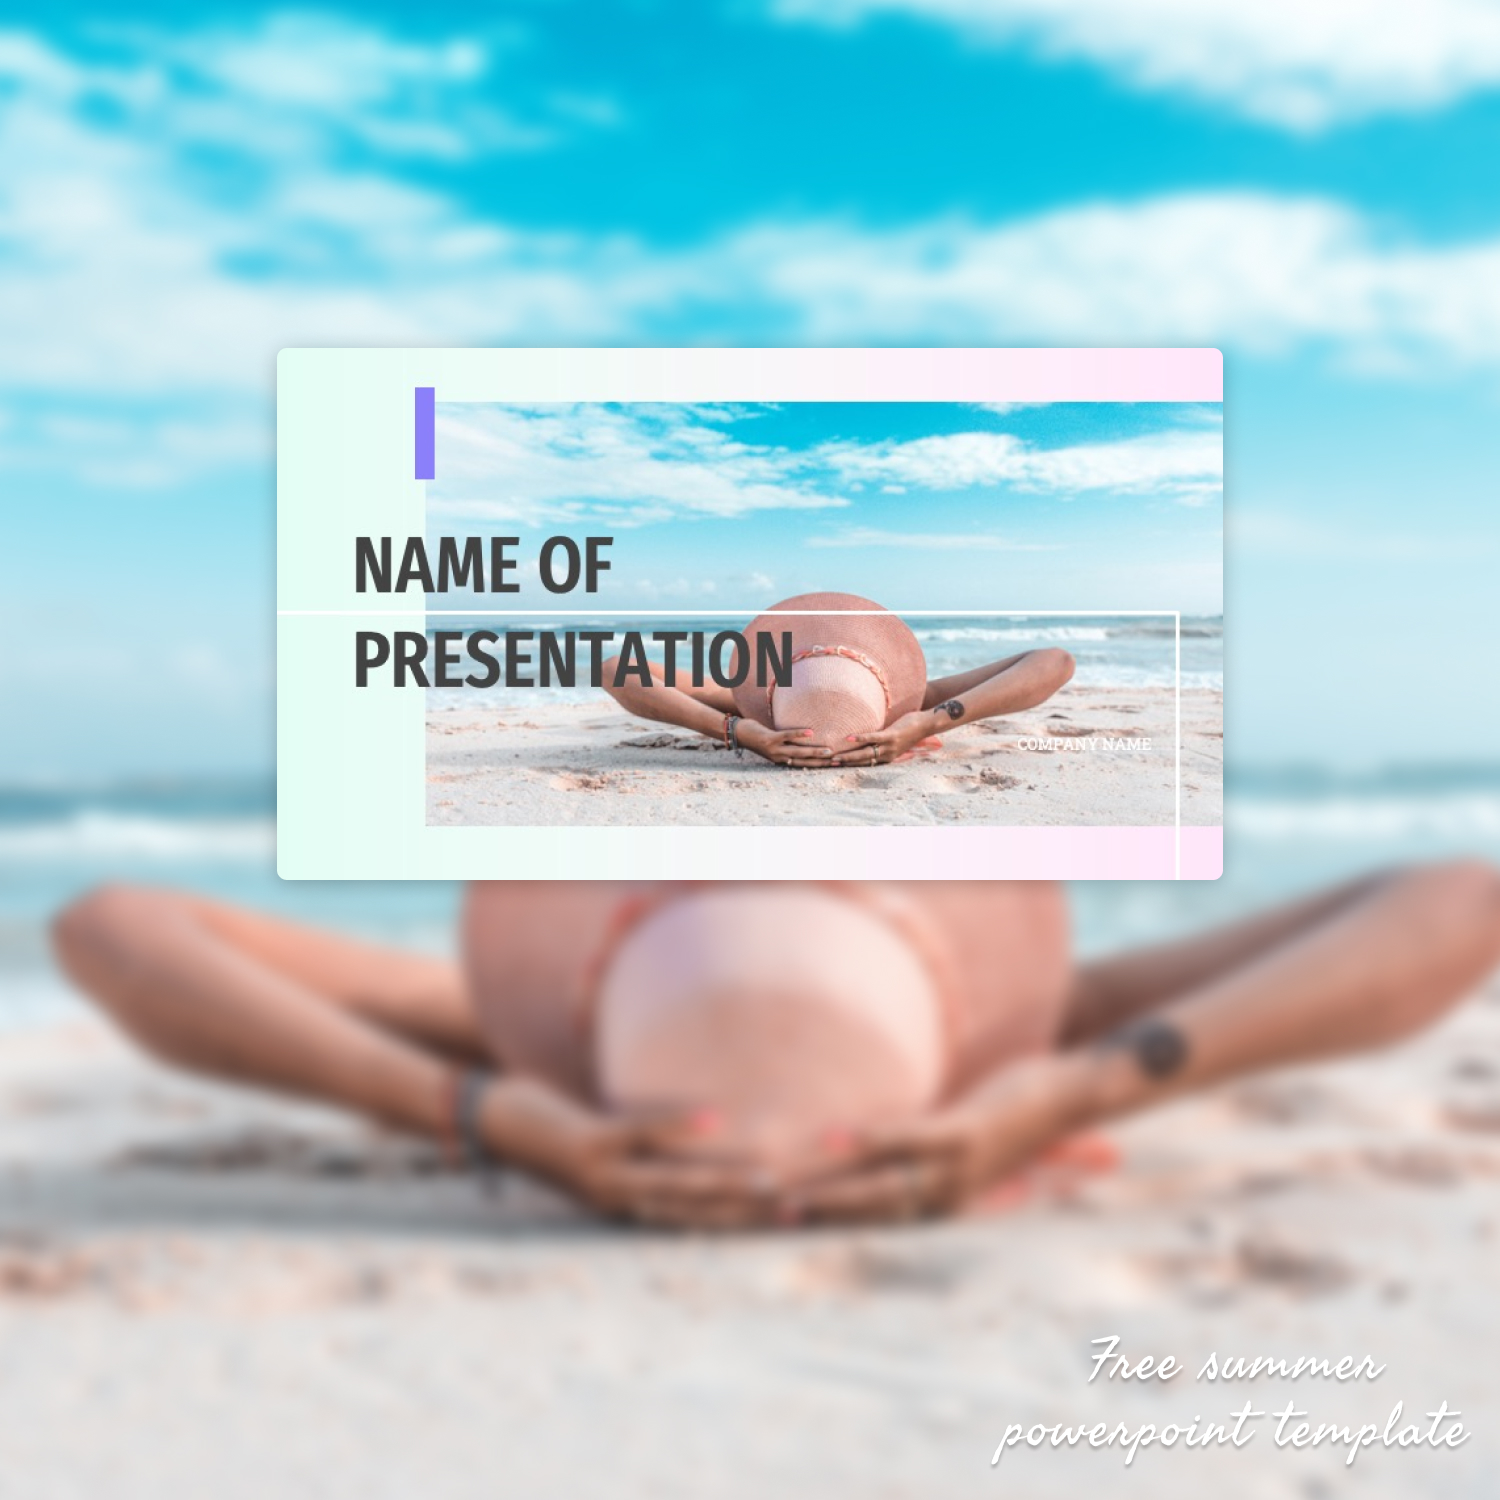 Prints of free summer powerpoint template.